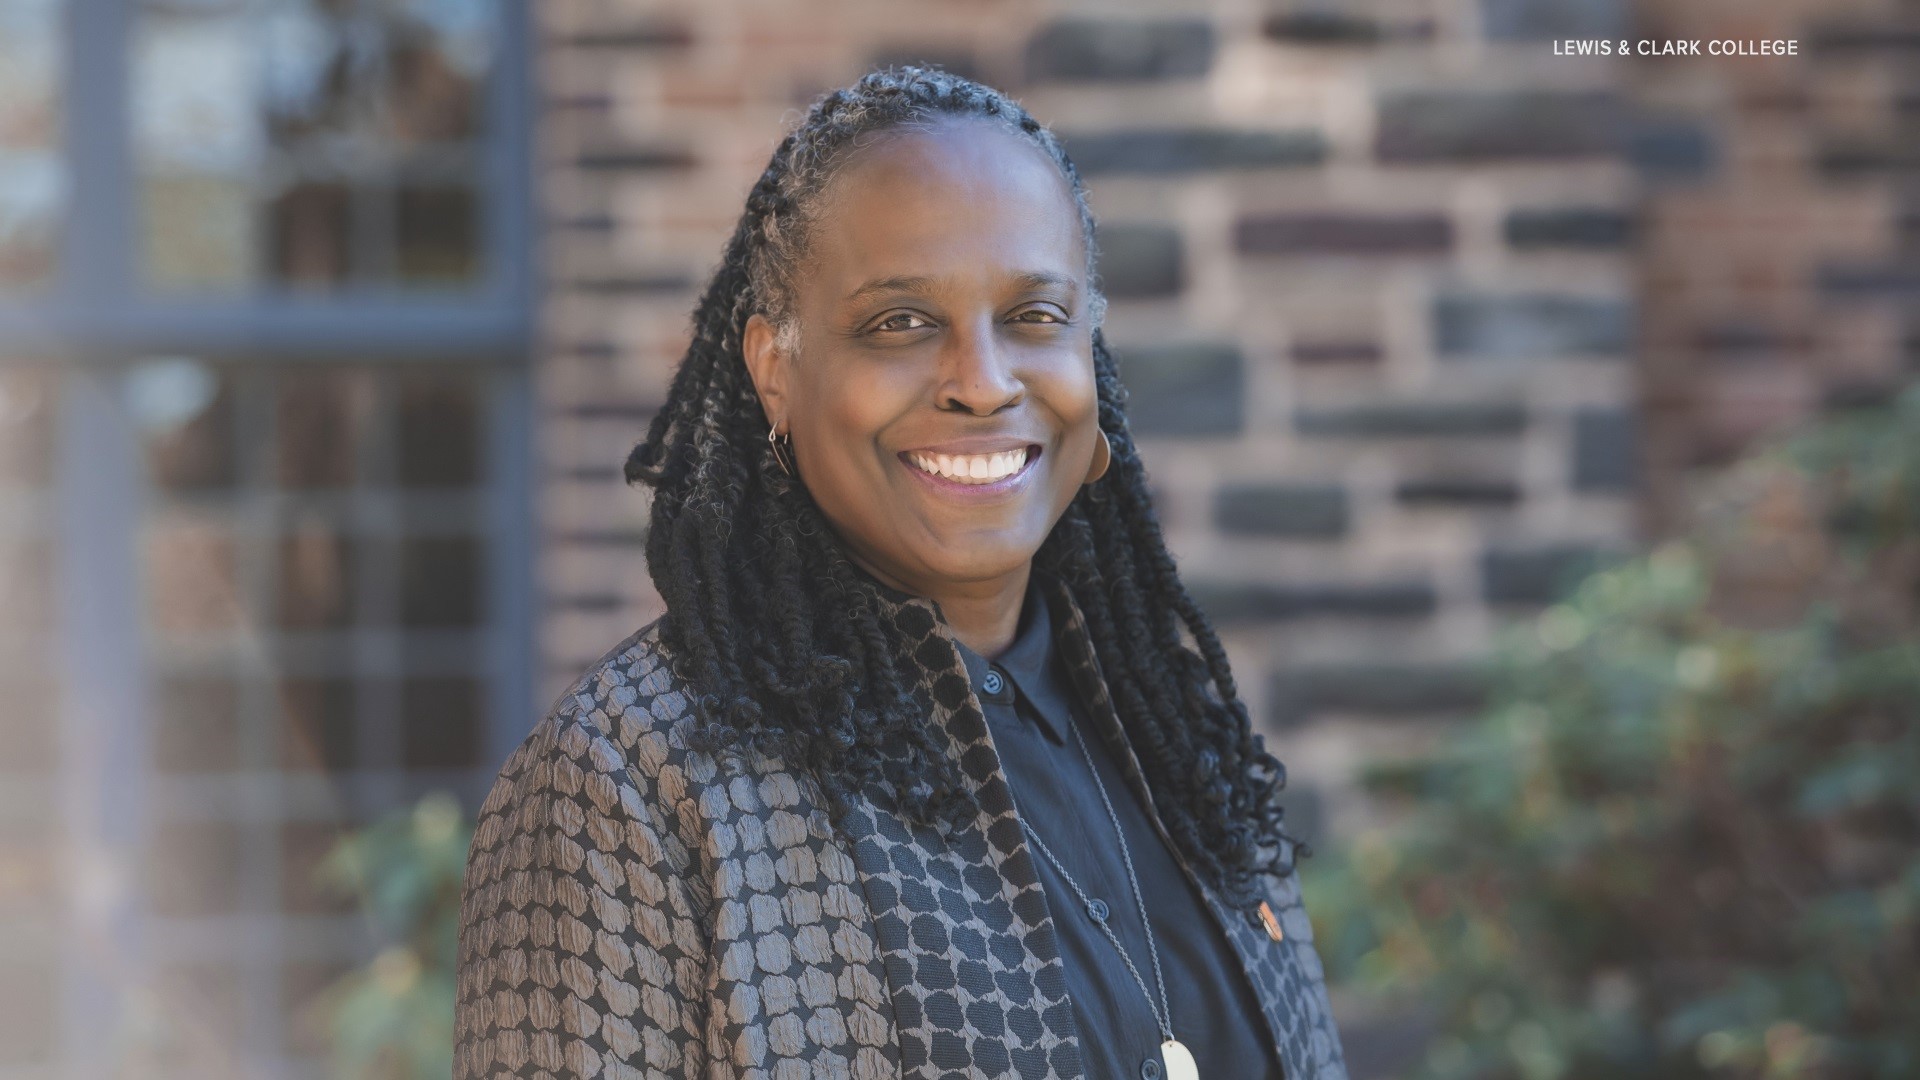 Dr. Robin Holmes-Sullivan will take over as college president this July. She will be the first woman and first person of color to serve in that role.